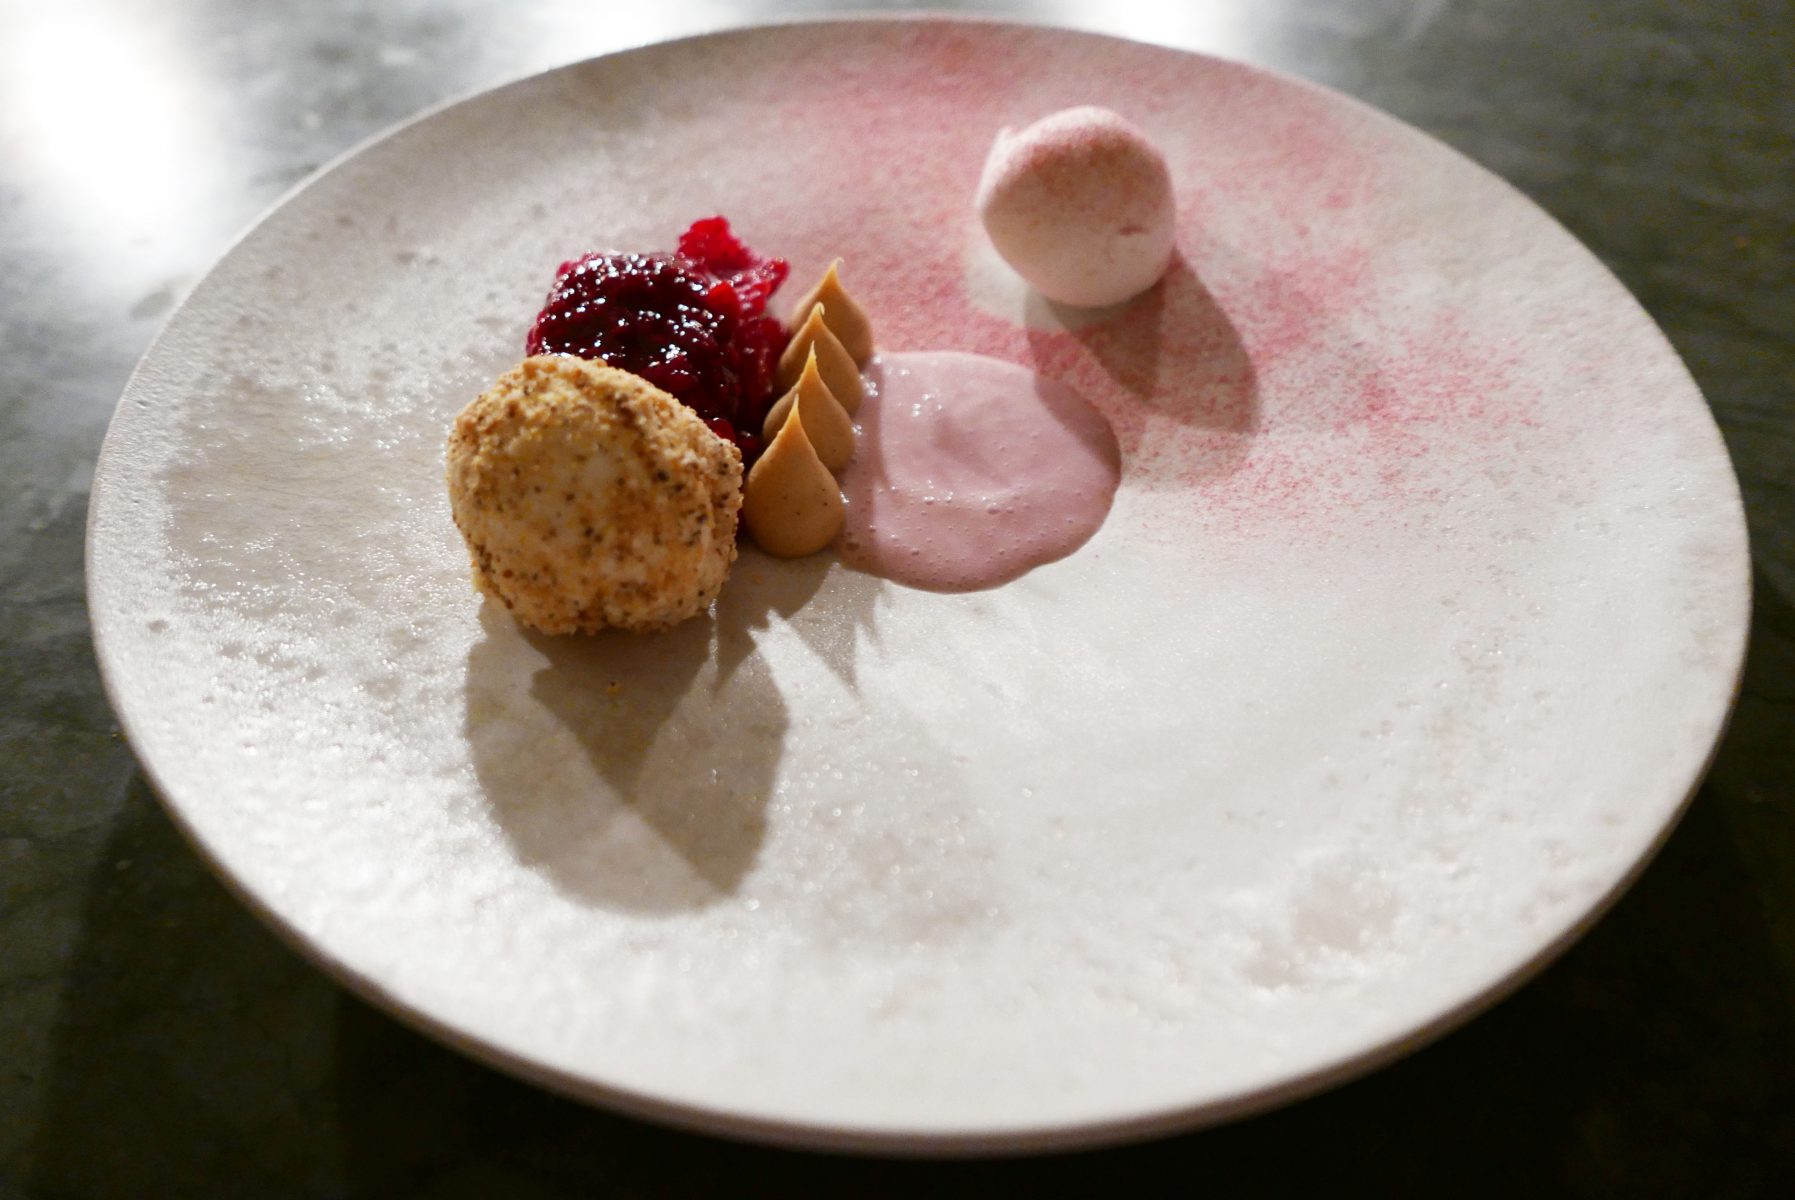 Roasted white chocolate,sour milk and raspberries